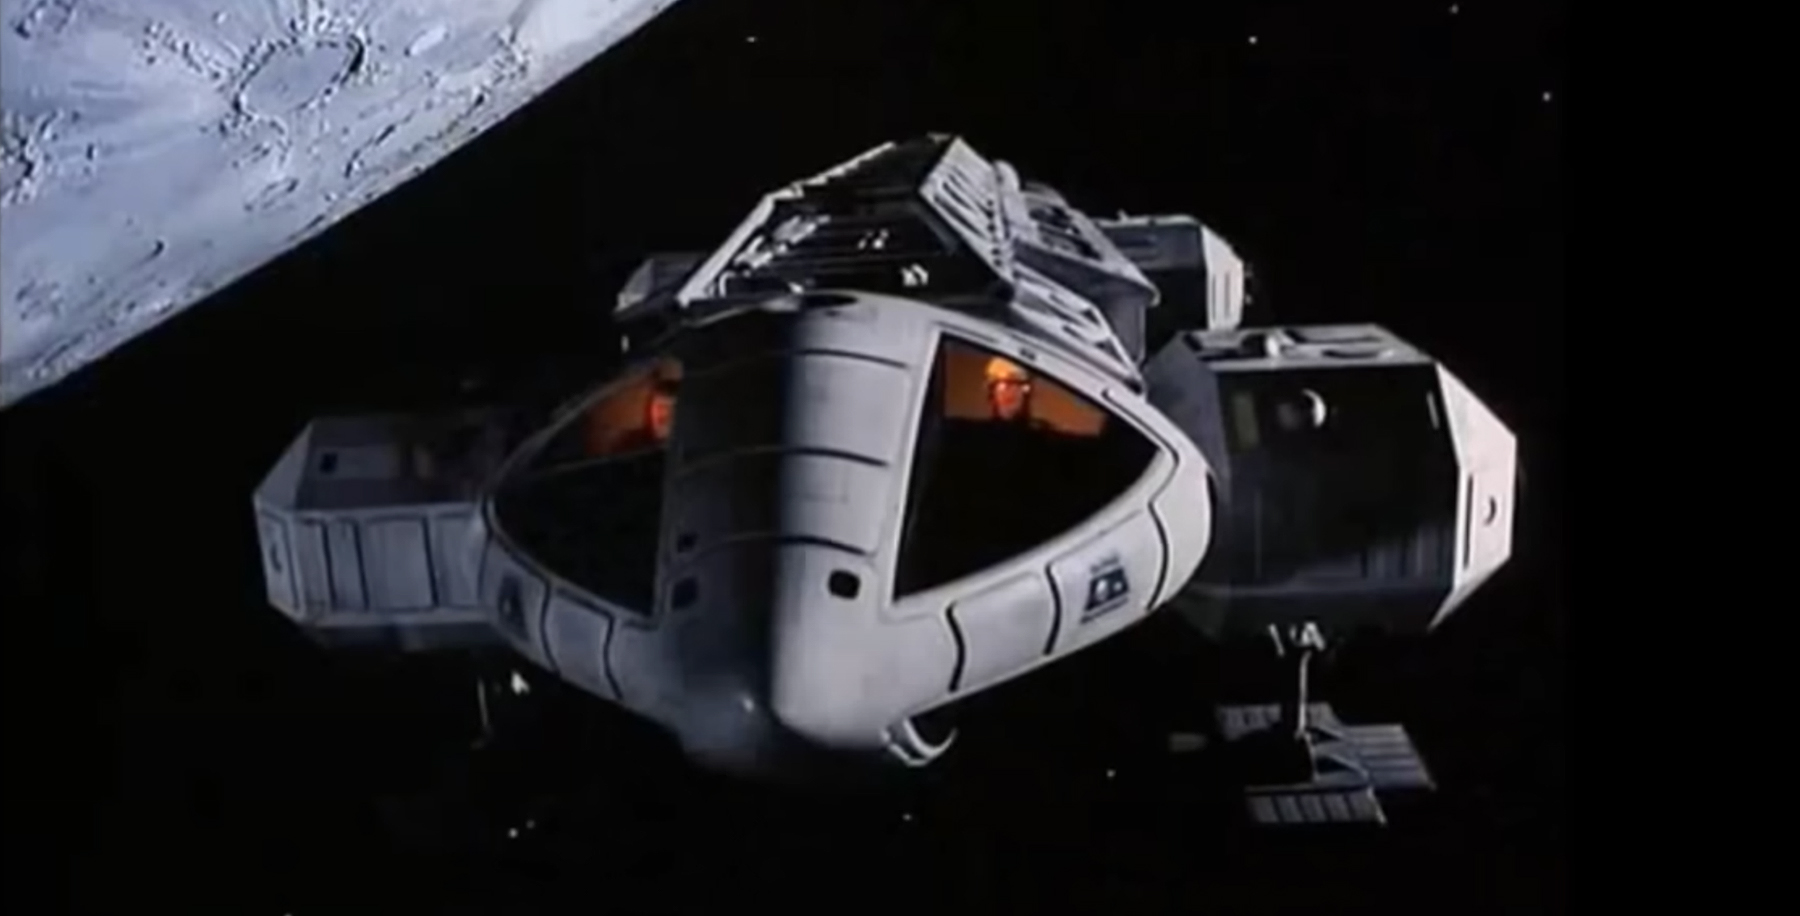 Aside, obviously, from the magnificent Martin Landau, the other star of Space: 1999 was the Eagle transporter.